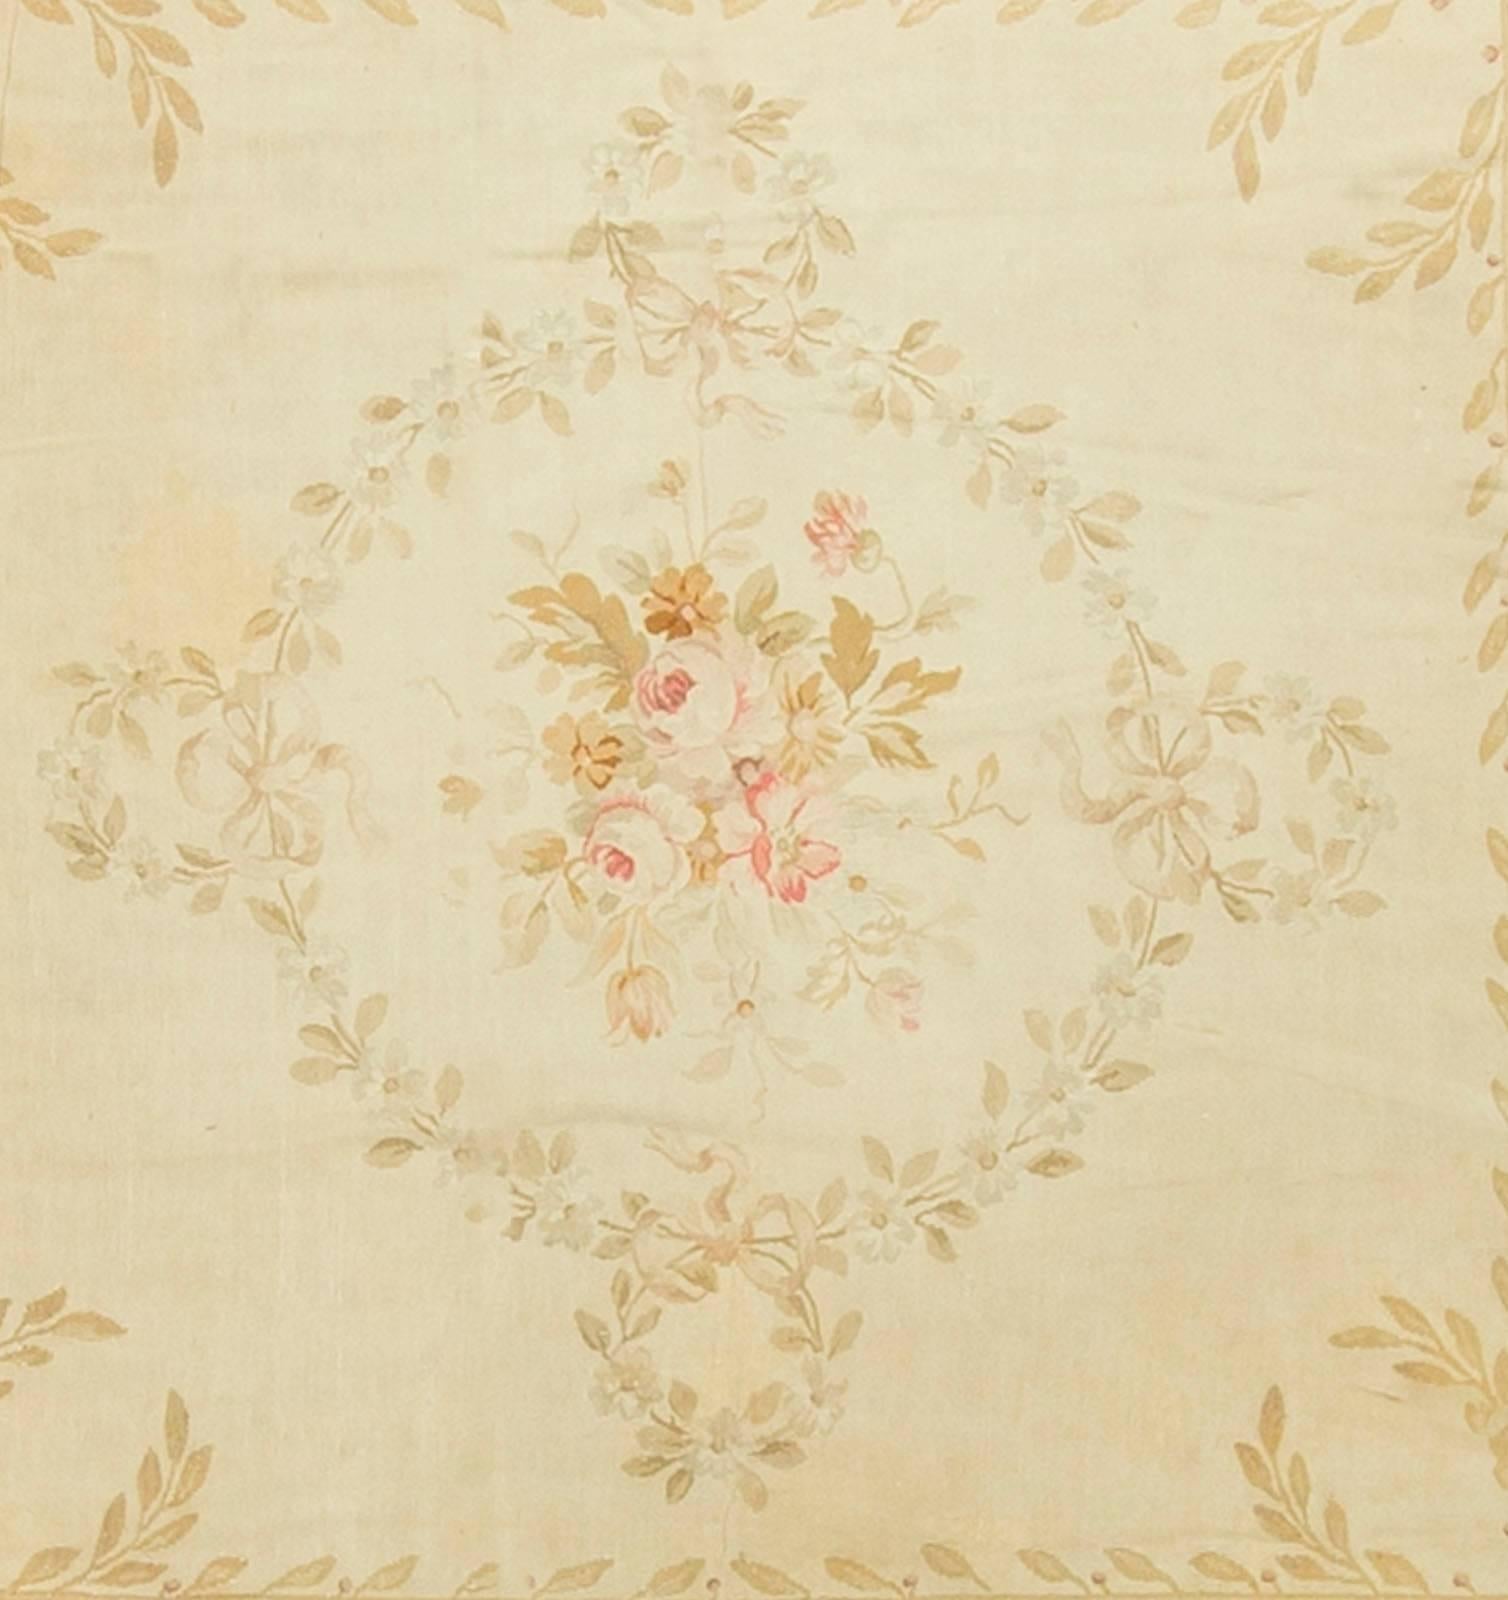 French Aubusson Rug Carpet Circa 1890. A wonderful square Aubusson in the typical soft creams and ivory colors so familiar in Aubusson's of this period. Situated on the banks of the River Creuse in France, Aubusson had been well known for producing